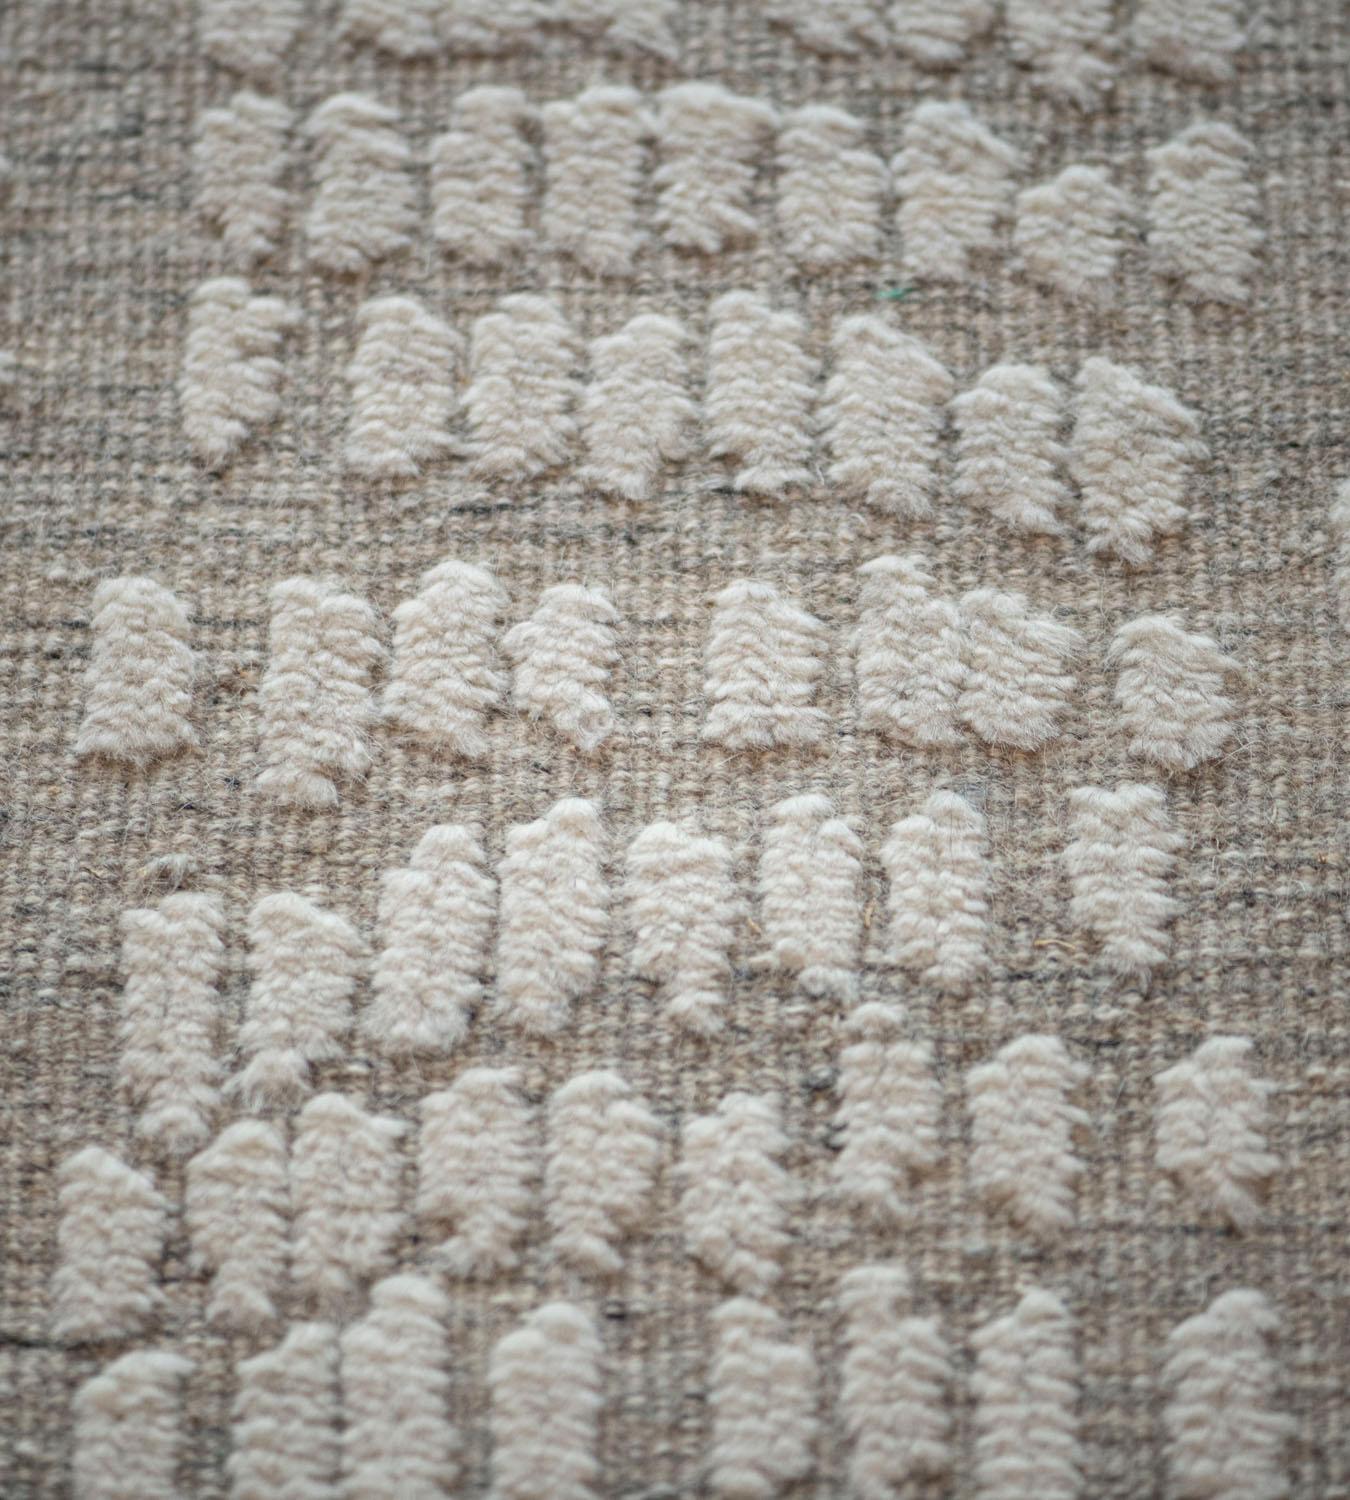 Hand-Knotted Handwoven Moroccan Inspired Textured Rug